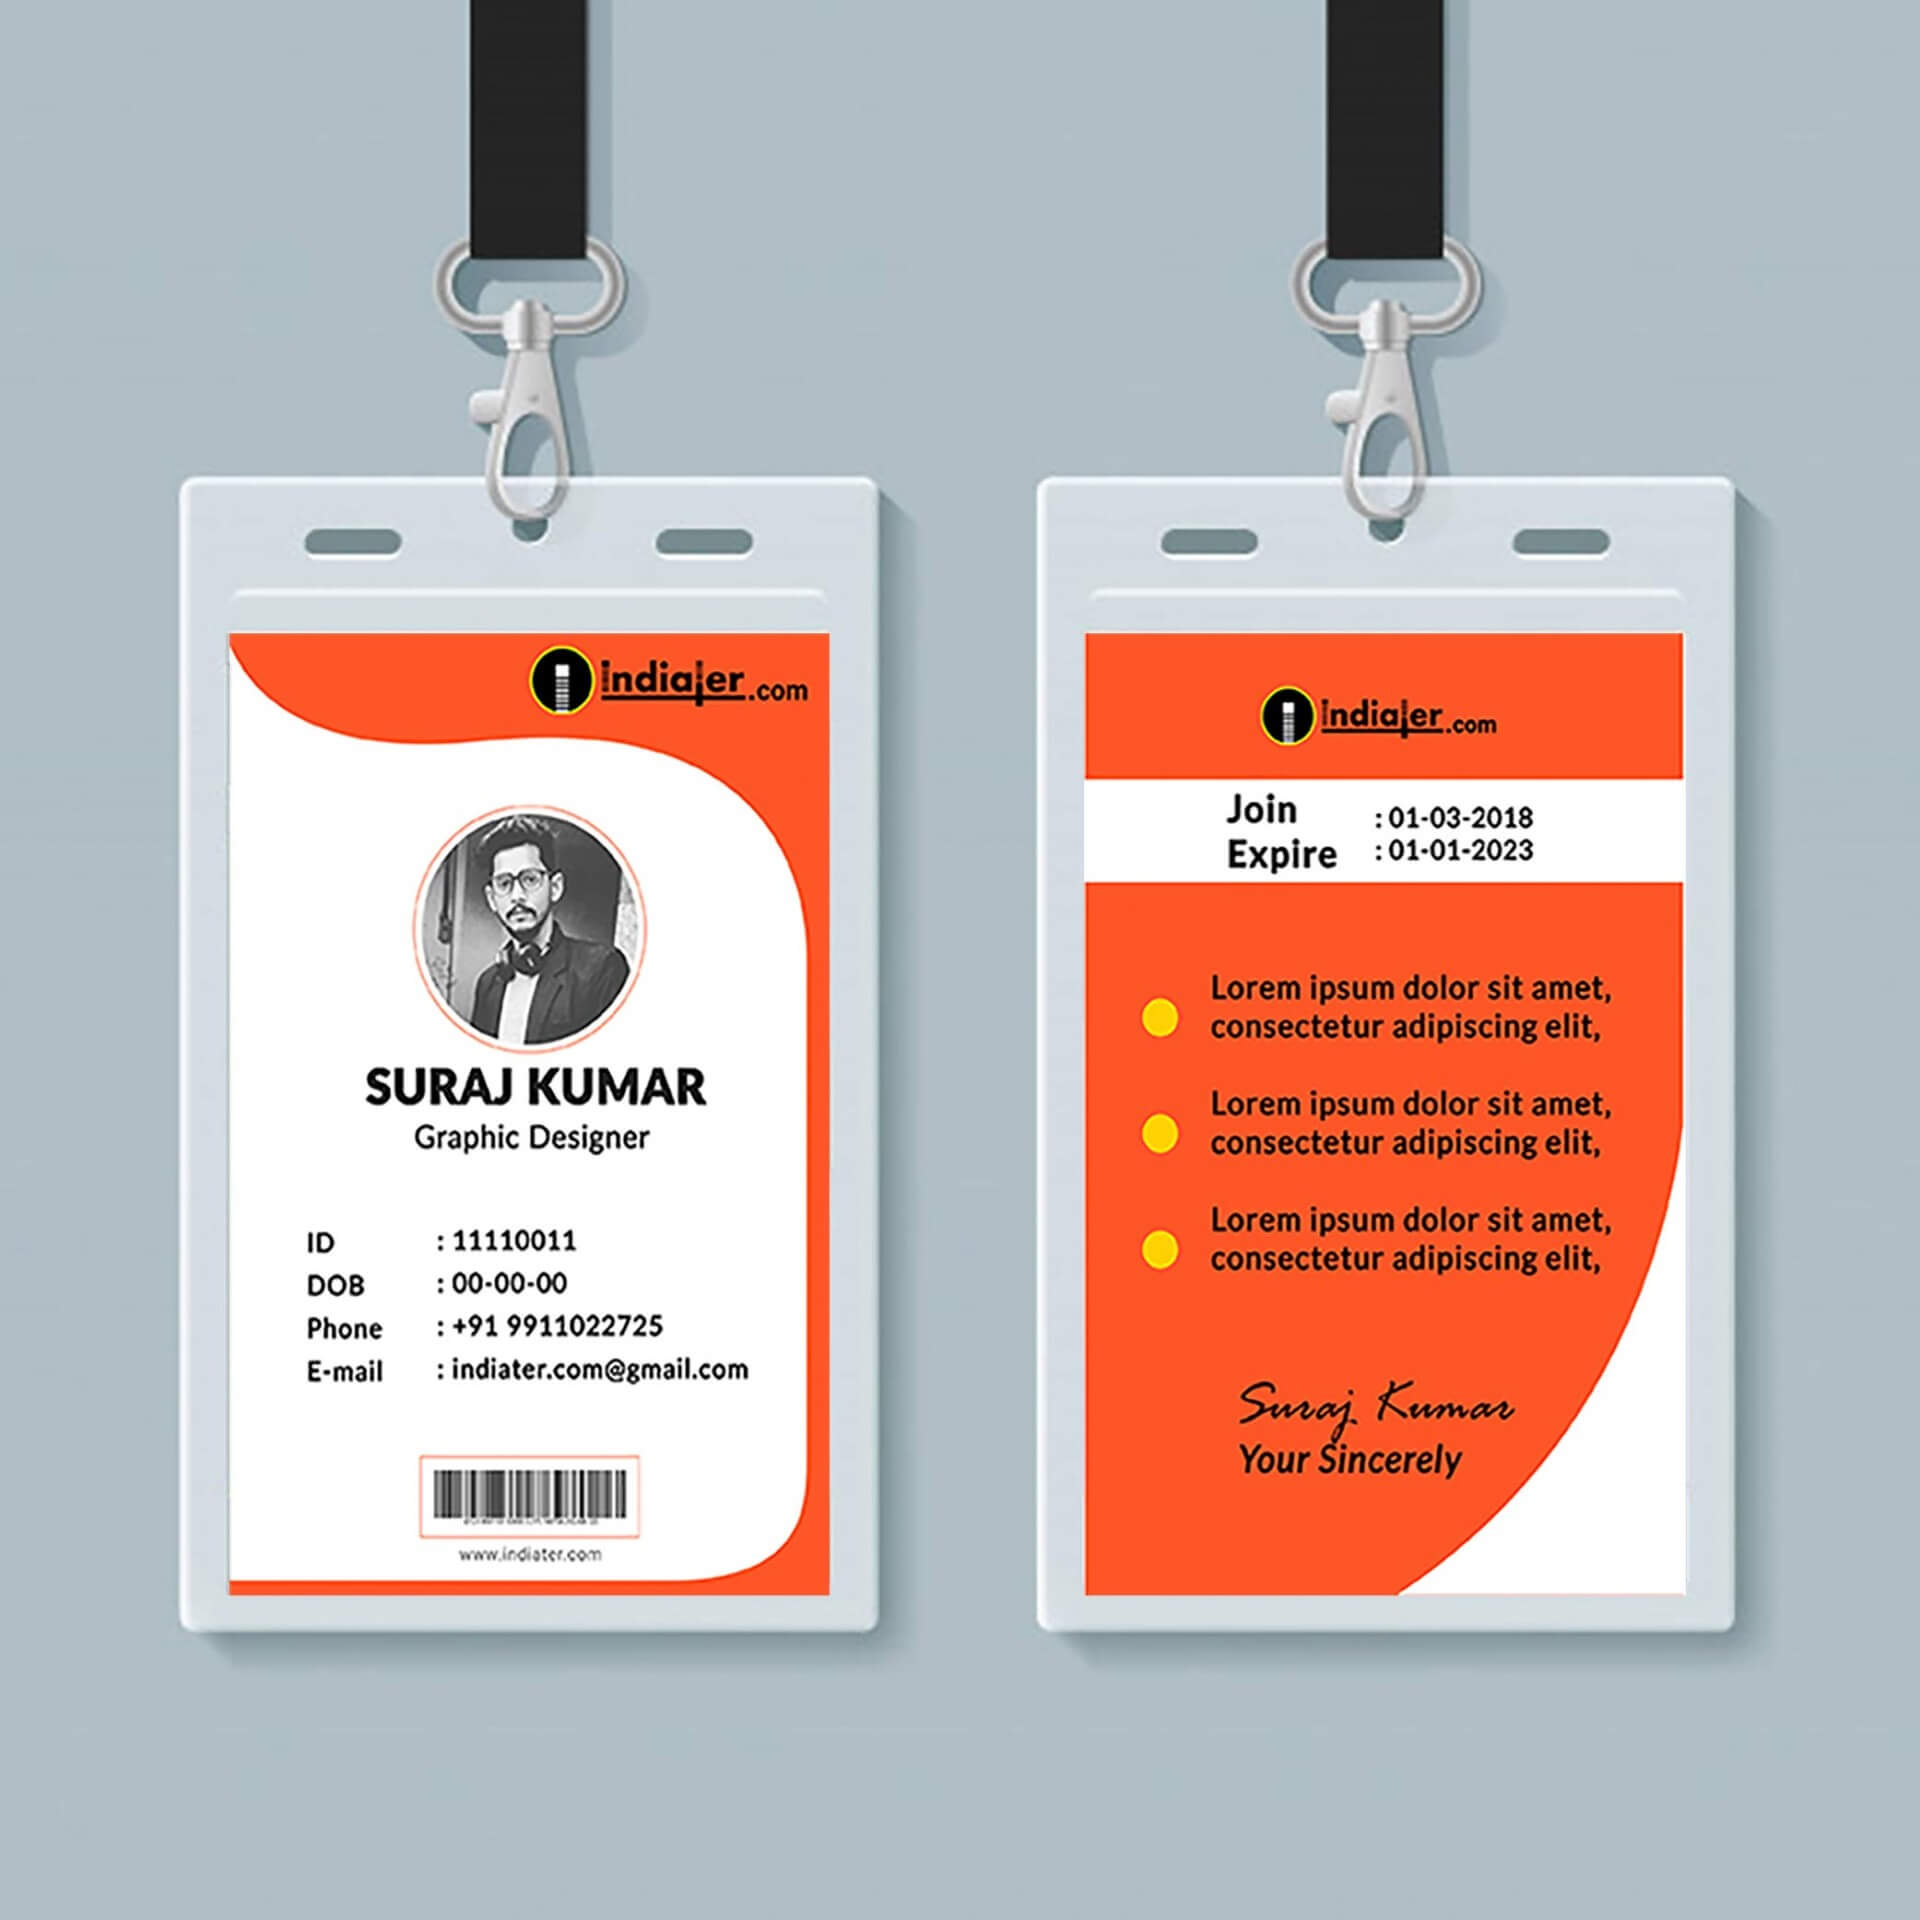 008 Employee Id Card Design Sample Psd Template Ideas File Regarding Template For Id Card Free Download